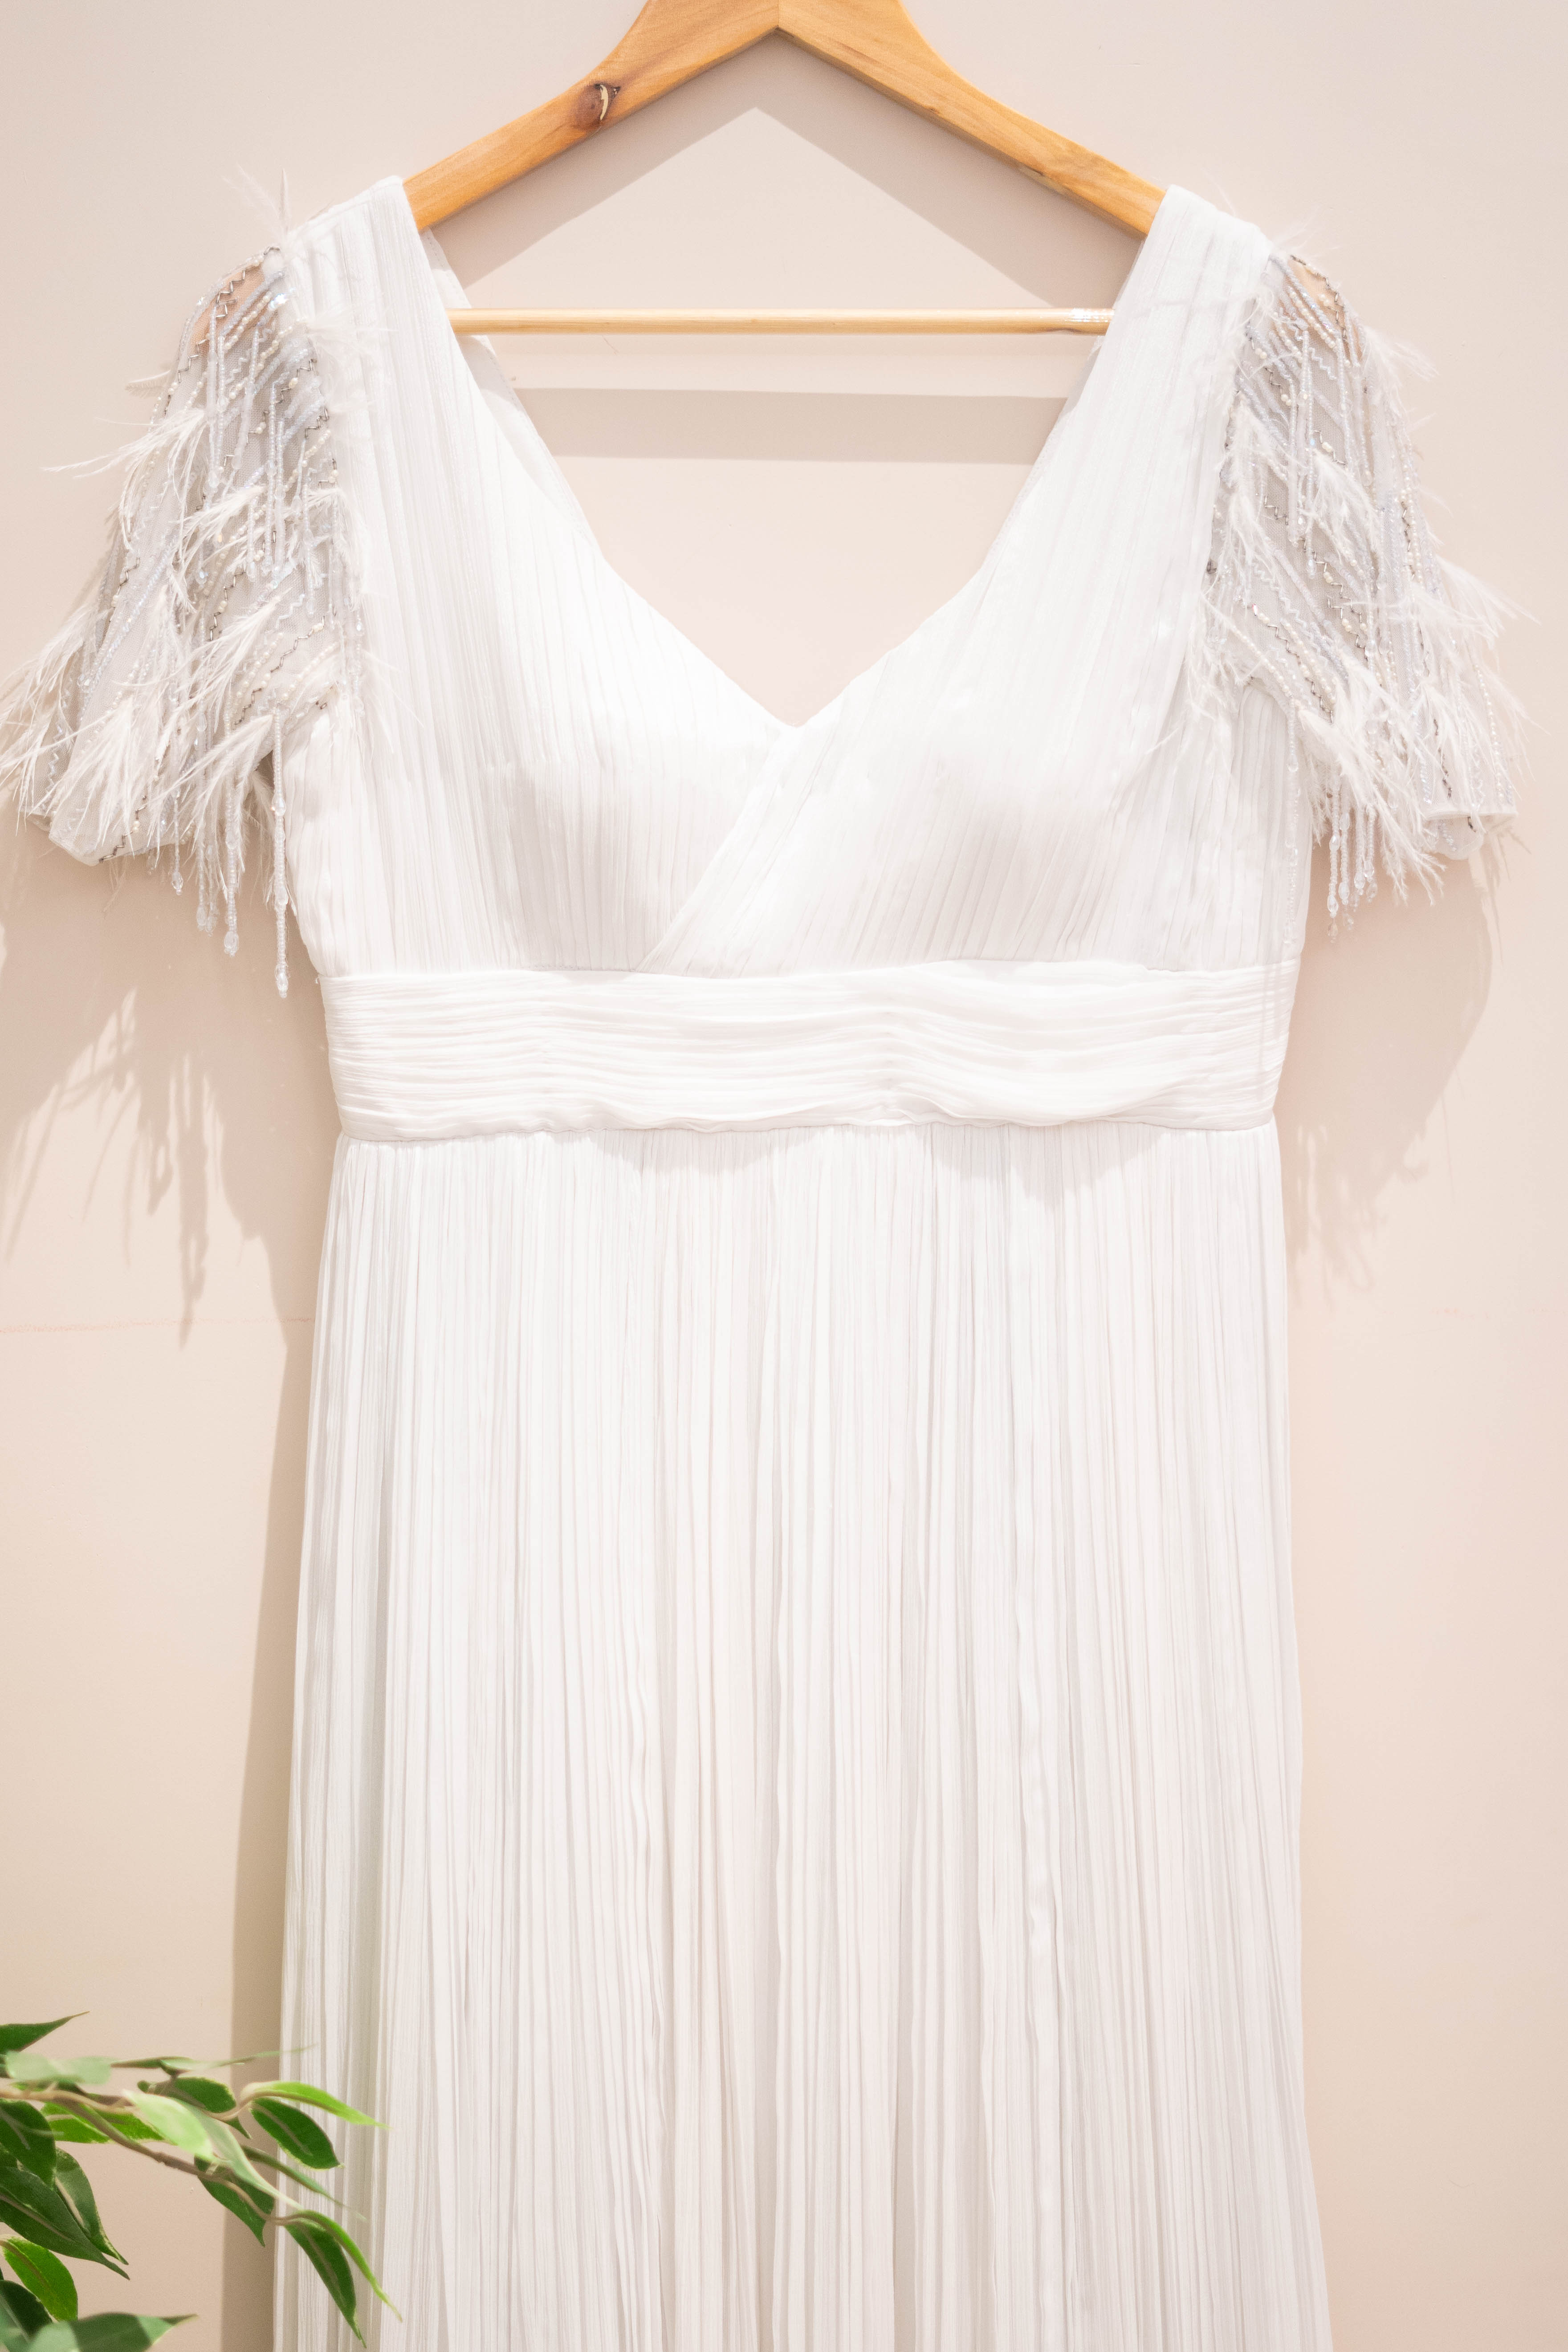 DS - white pleatted dress